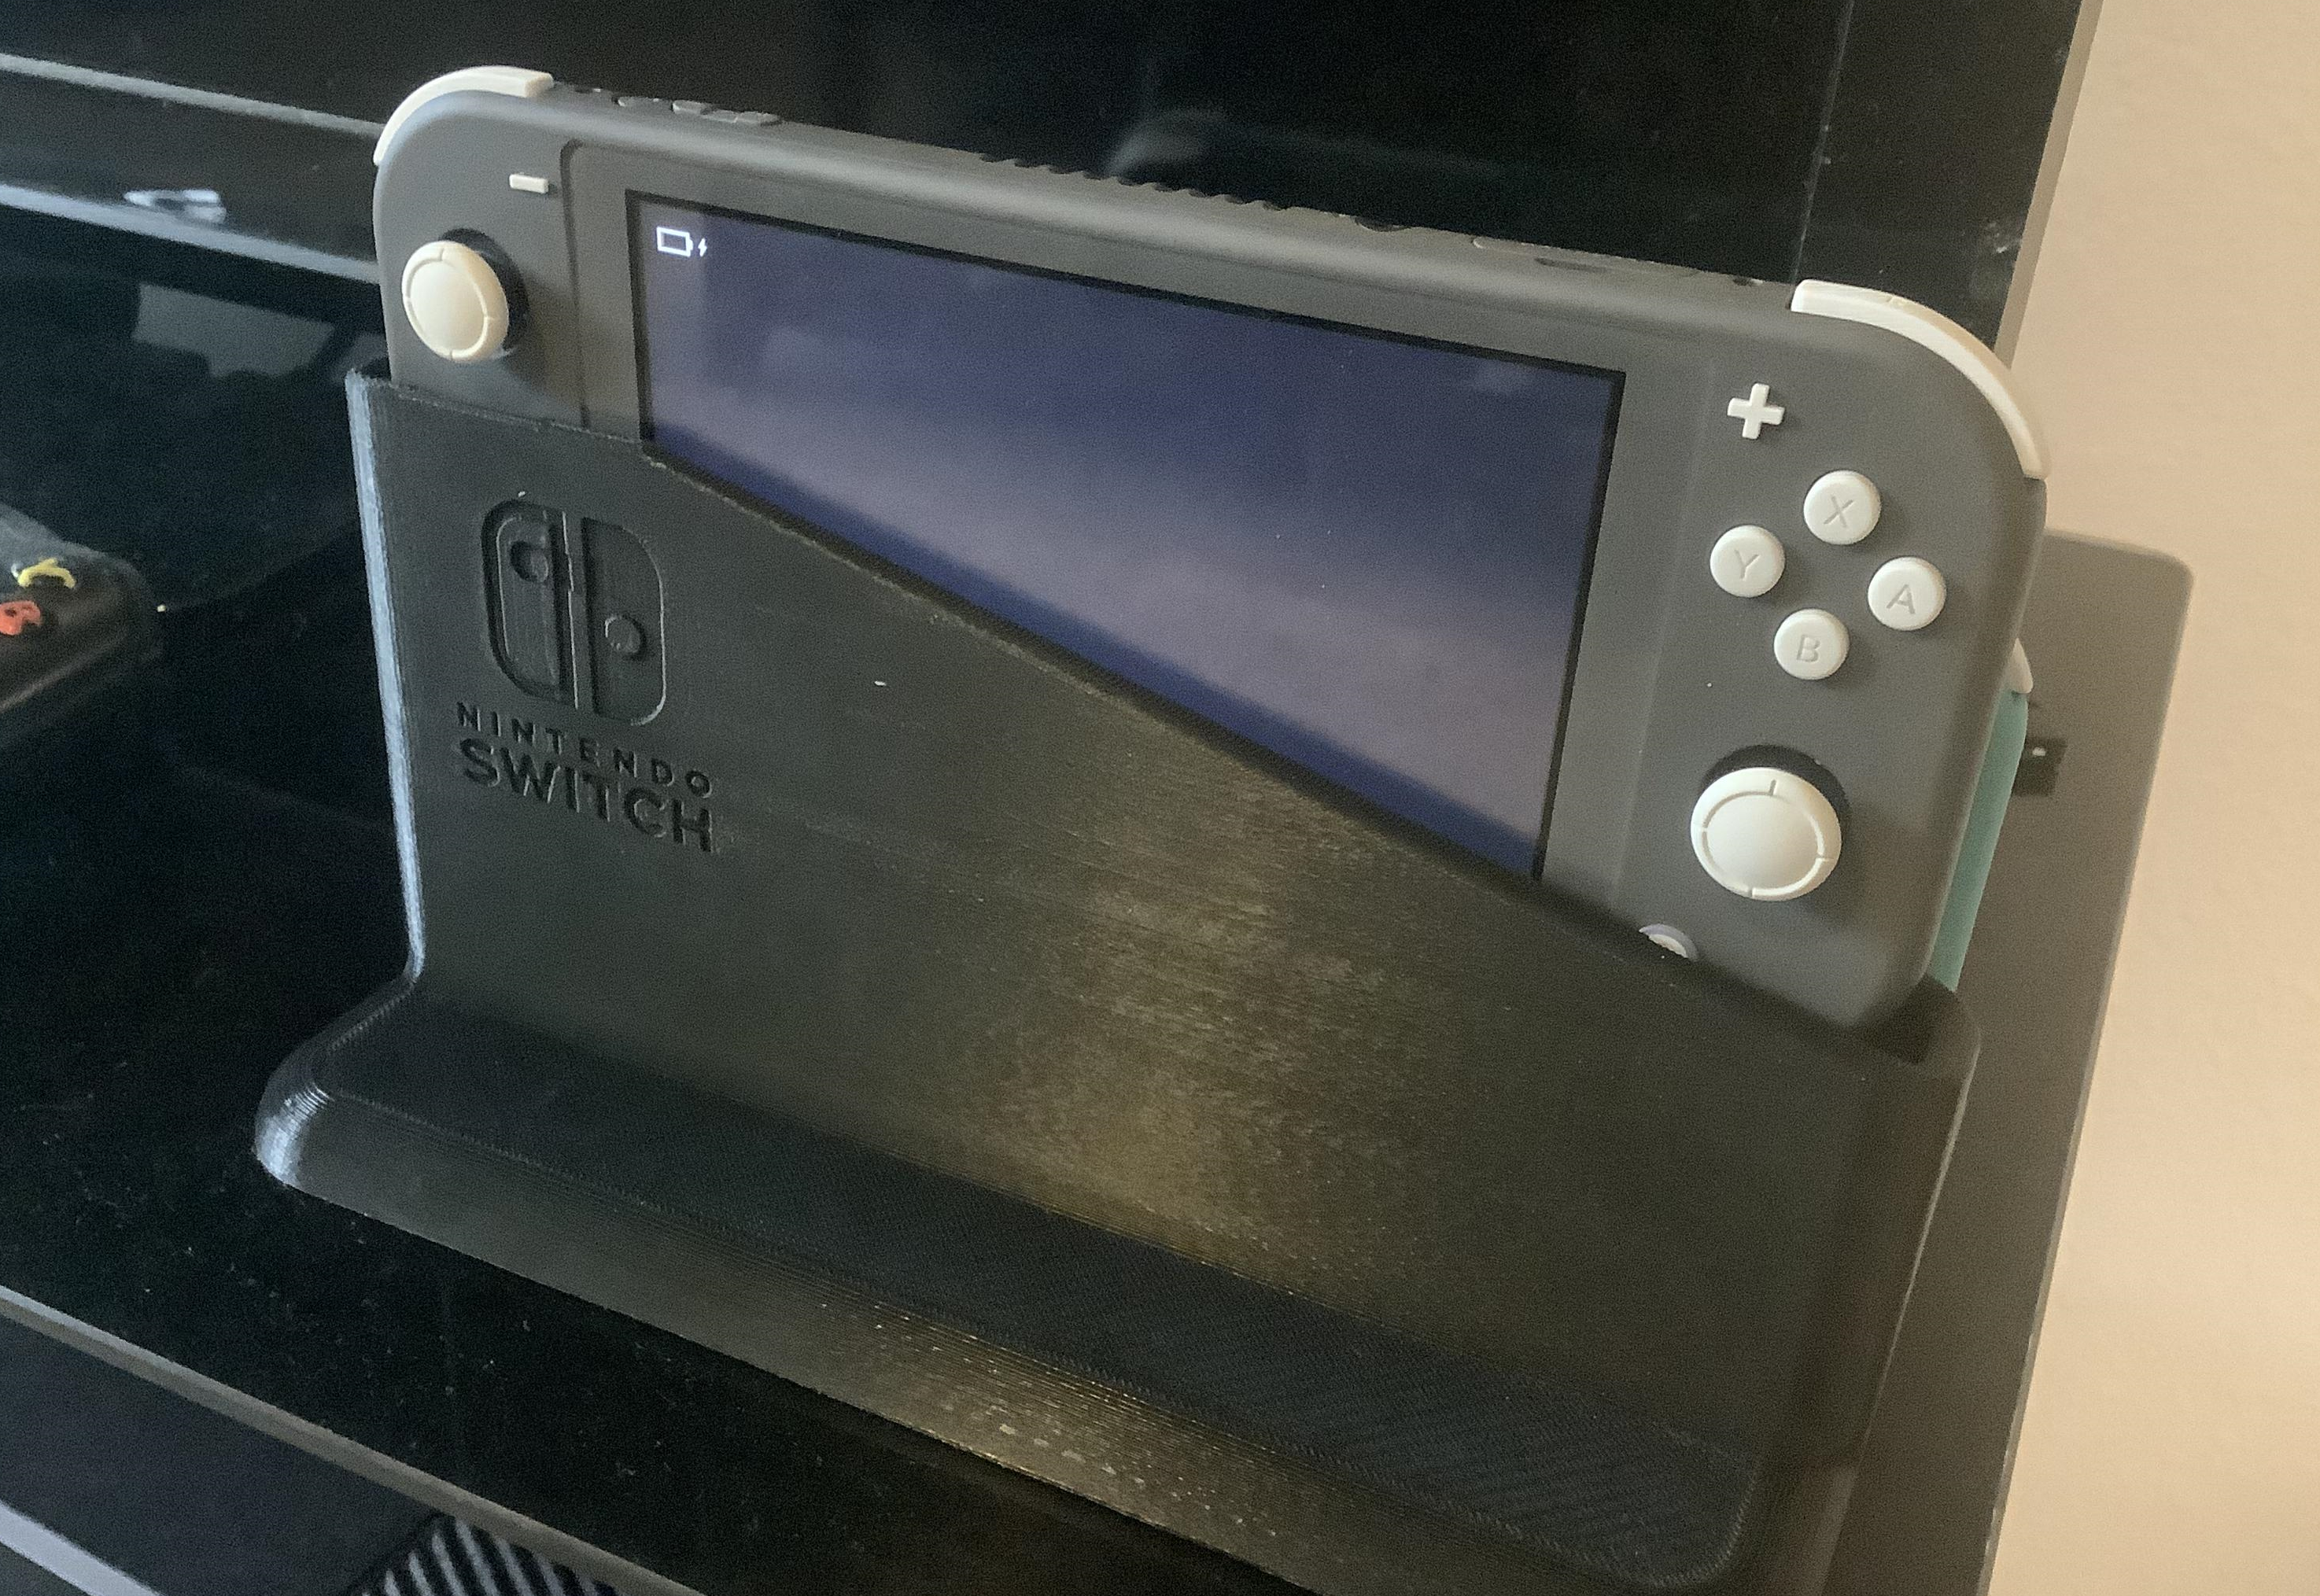 can you dock a switch lite to a tv